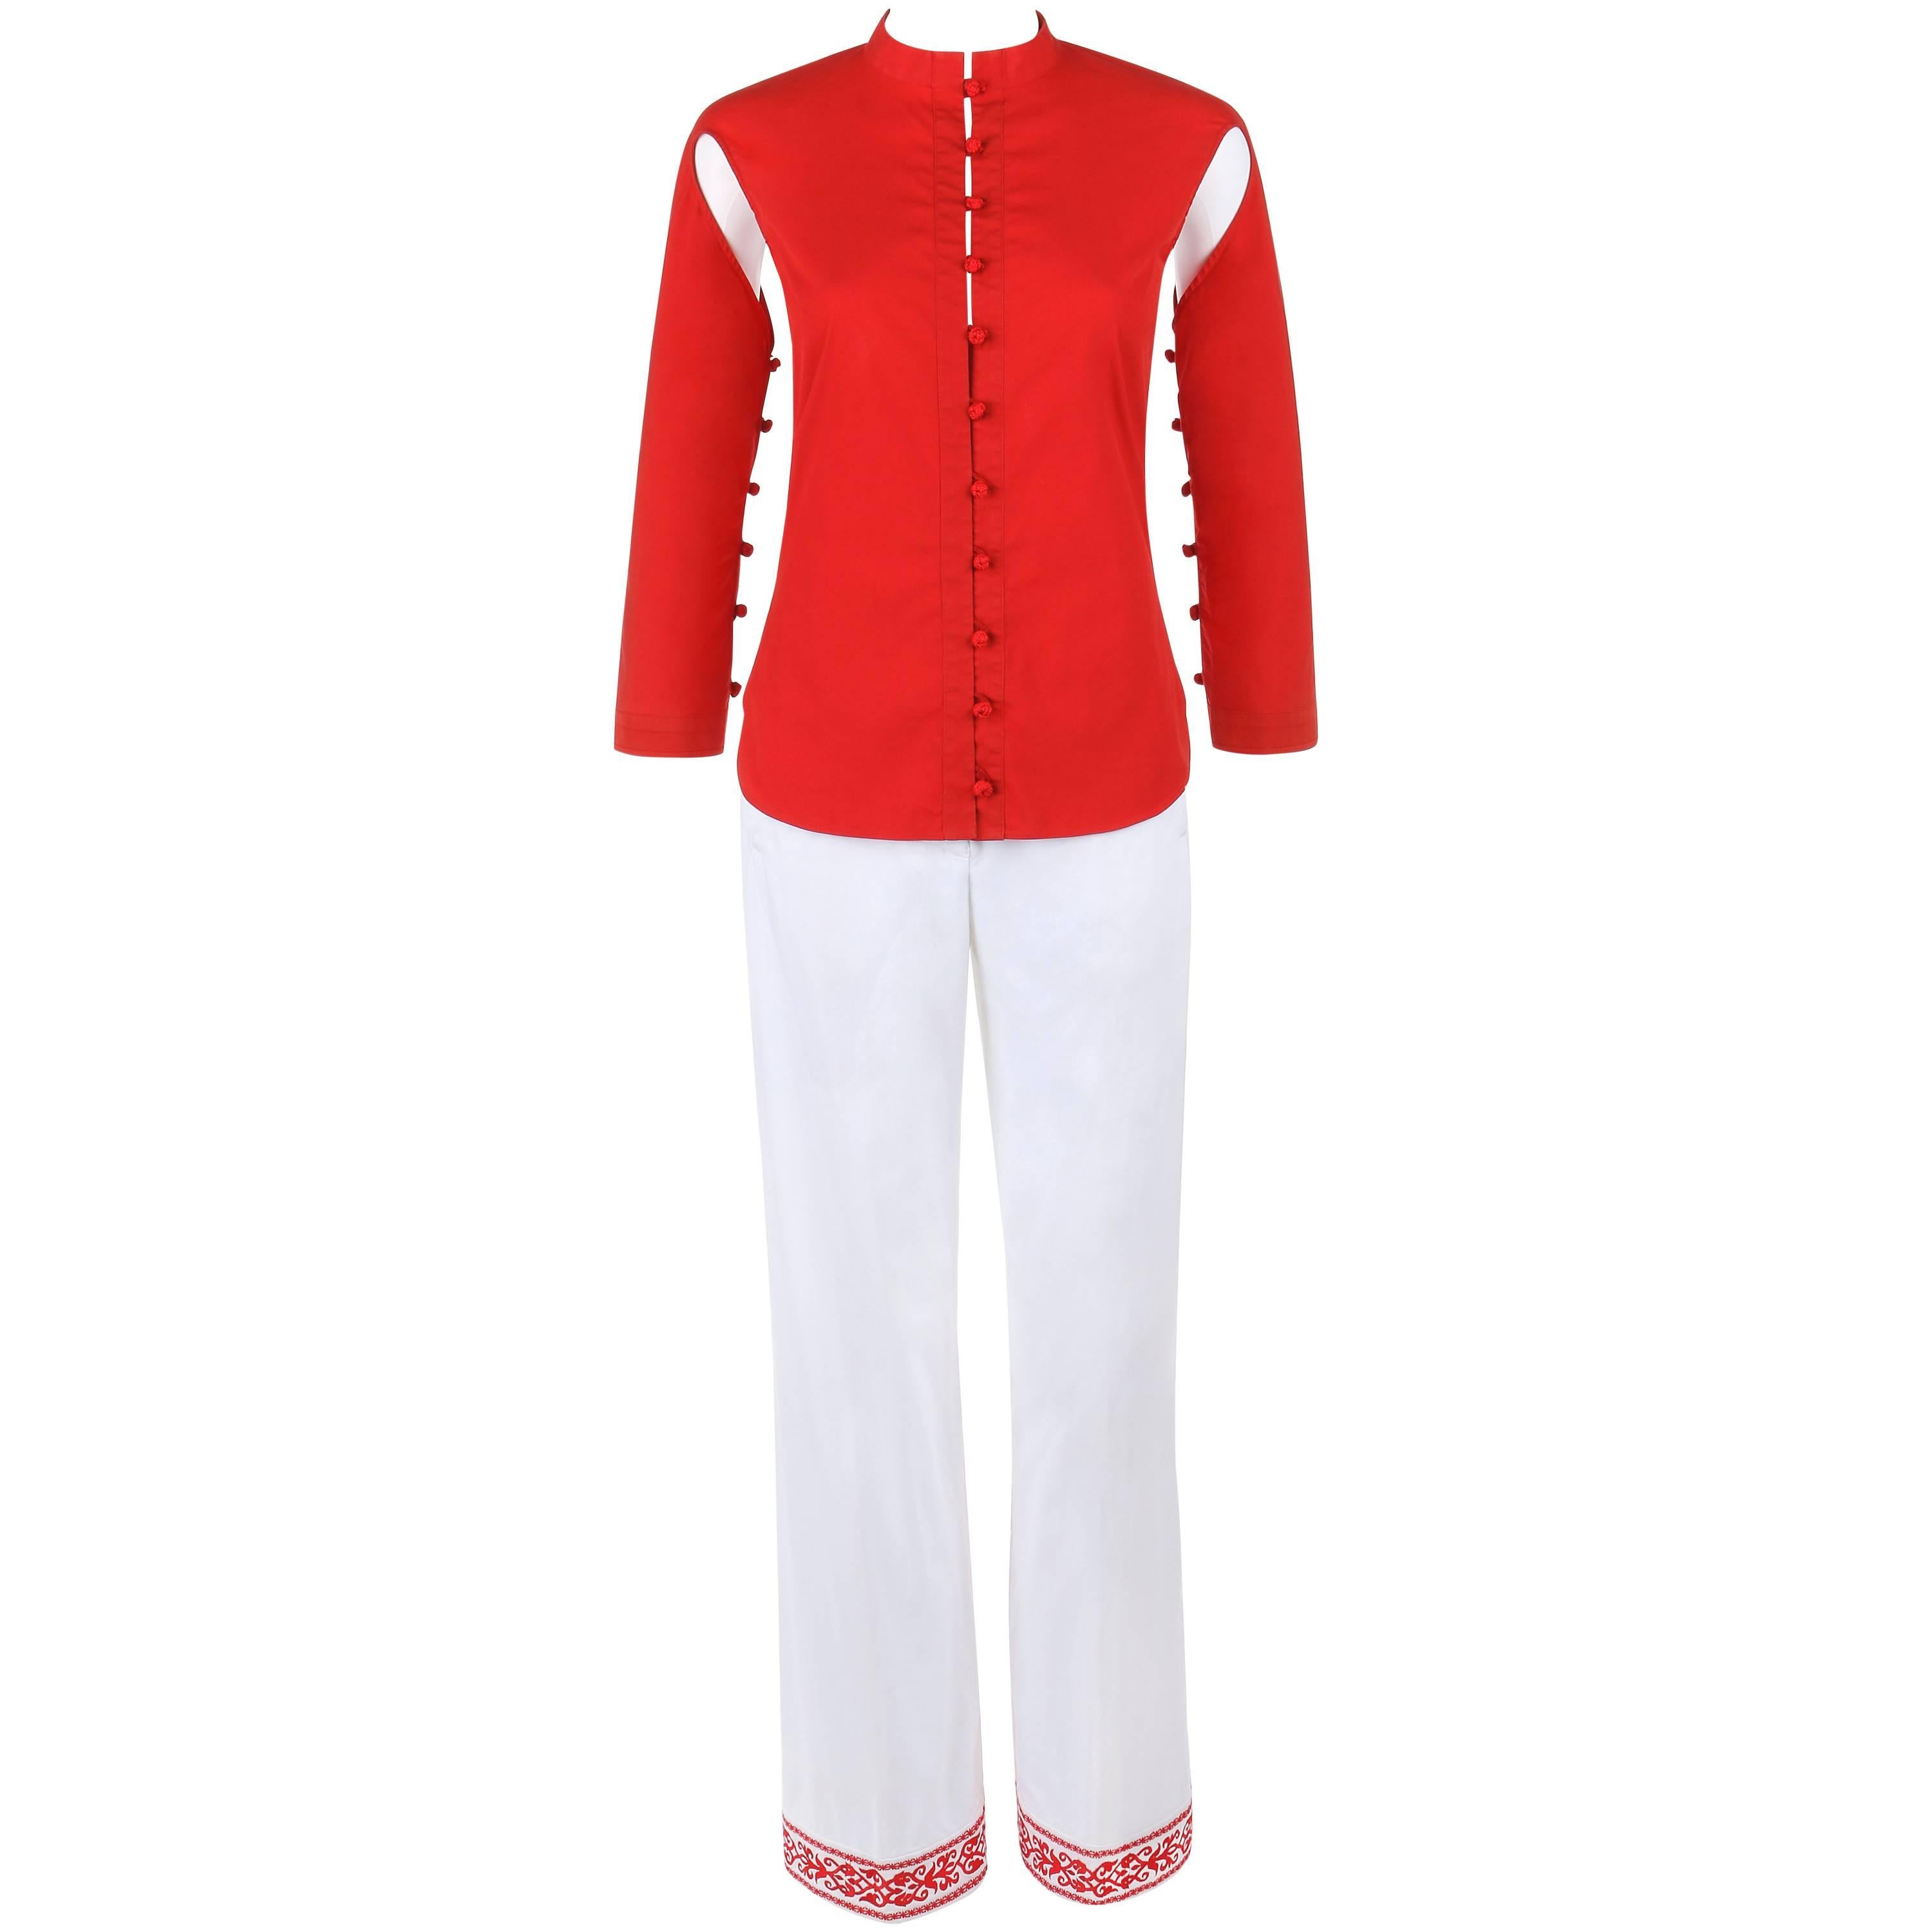 ALEXANDER McQUEEN S/S 2000 "Eye" 2 Pc Red Cutout Top White Embroidered Pants Set For Sale